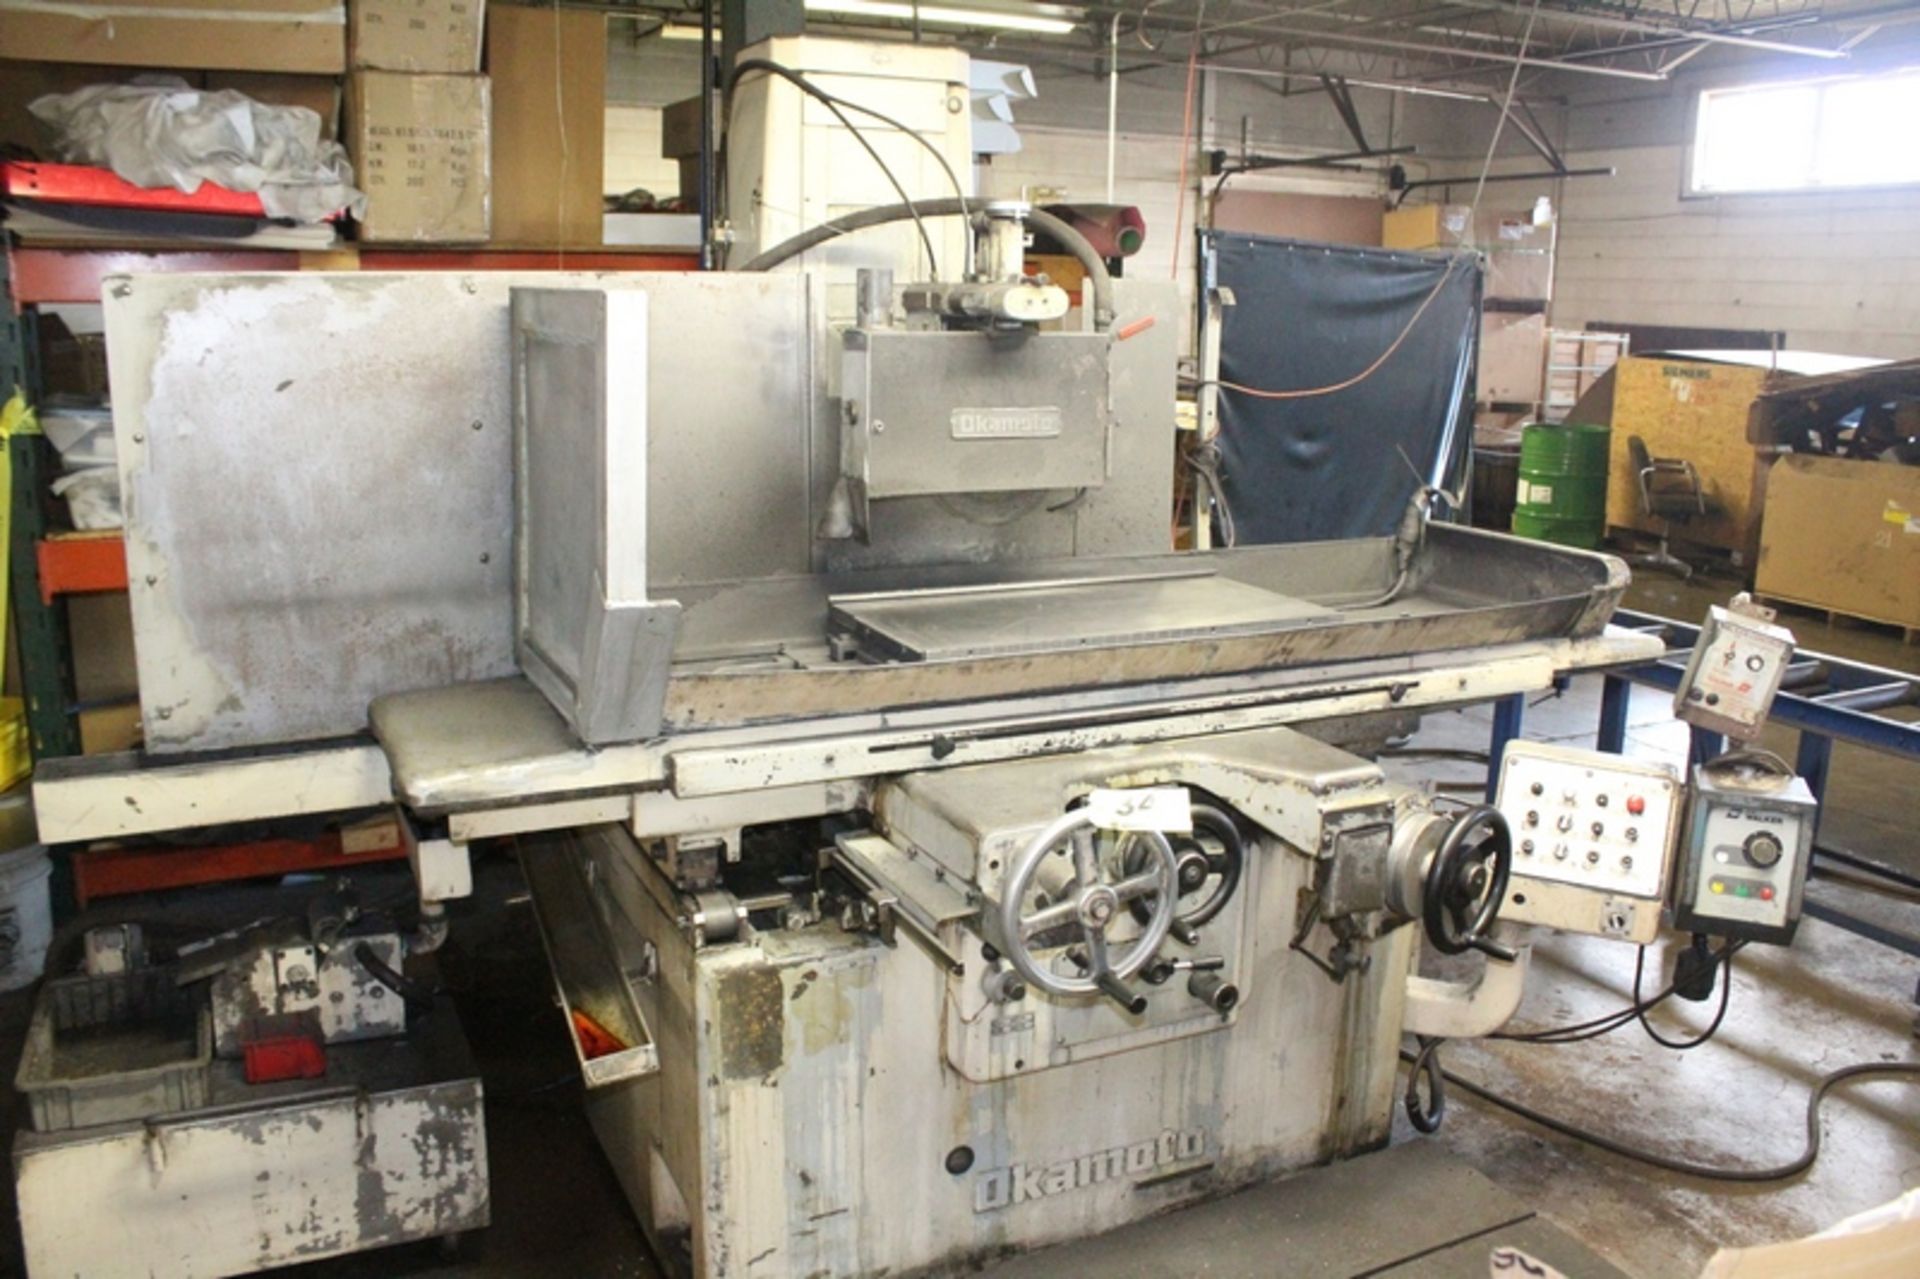 OKAMOTO 16" X 32" MODEL 1632N HYDRAULIC SURFACE GRINDER, S/N 8487 (NEW 1987), WITH ELECTROMAGNETIC